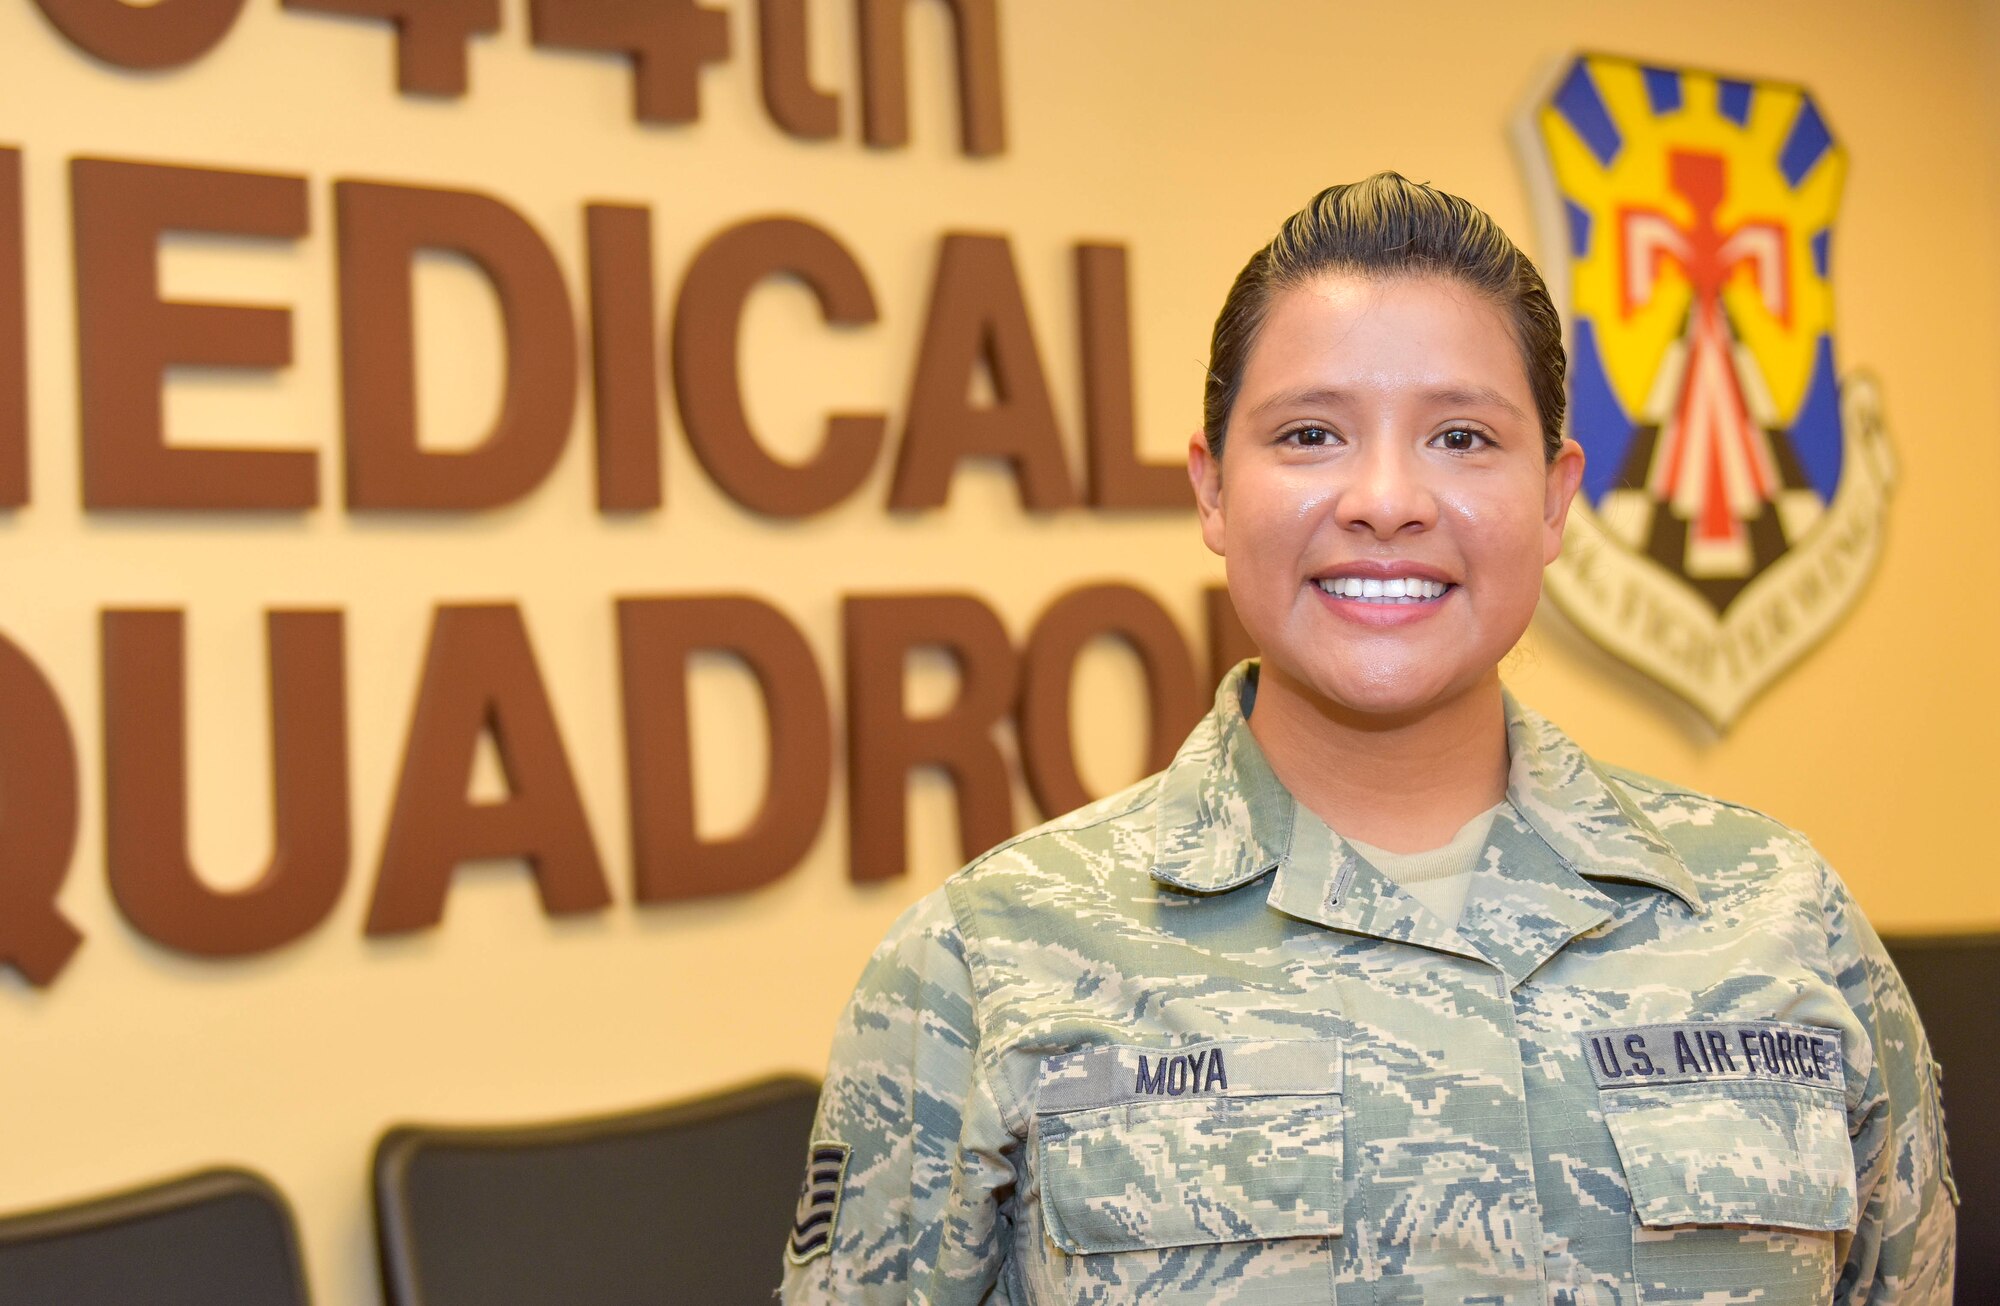 The July 944th Fighter Wing Warrior of the Month is Tech. Sgt. Roxanna Moya, 944th Medical Squadron medical technician.